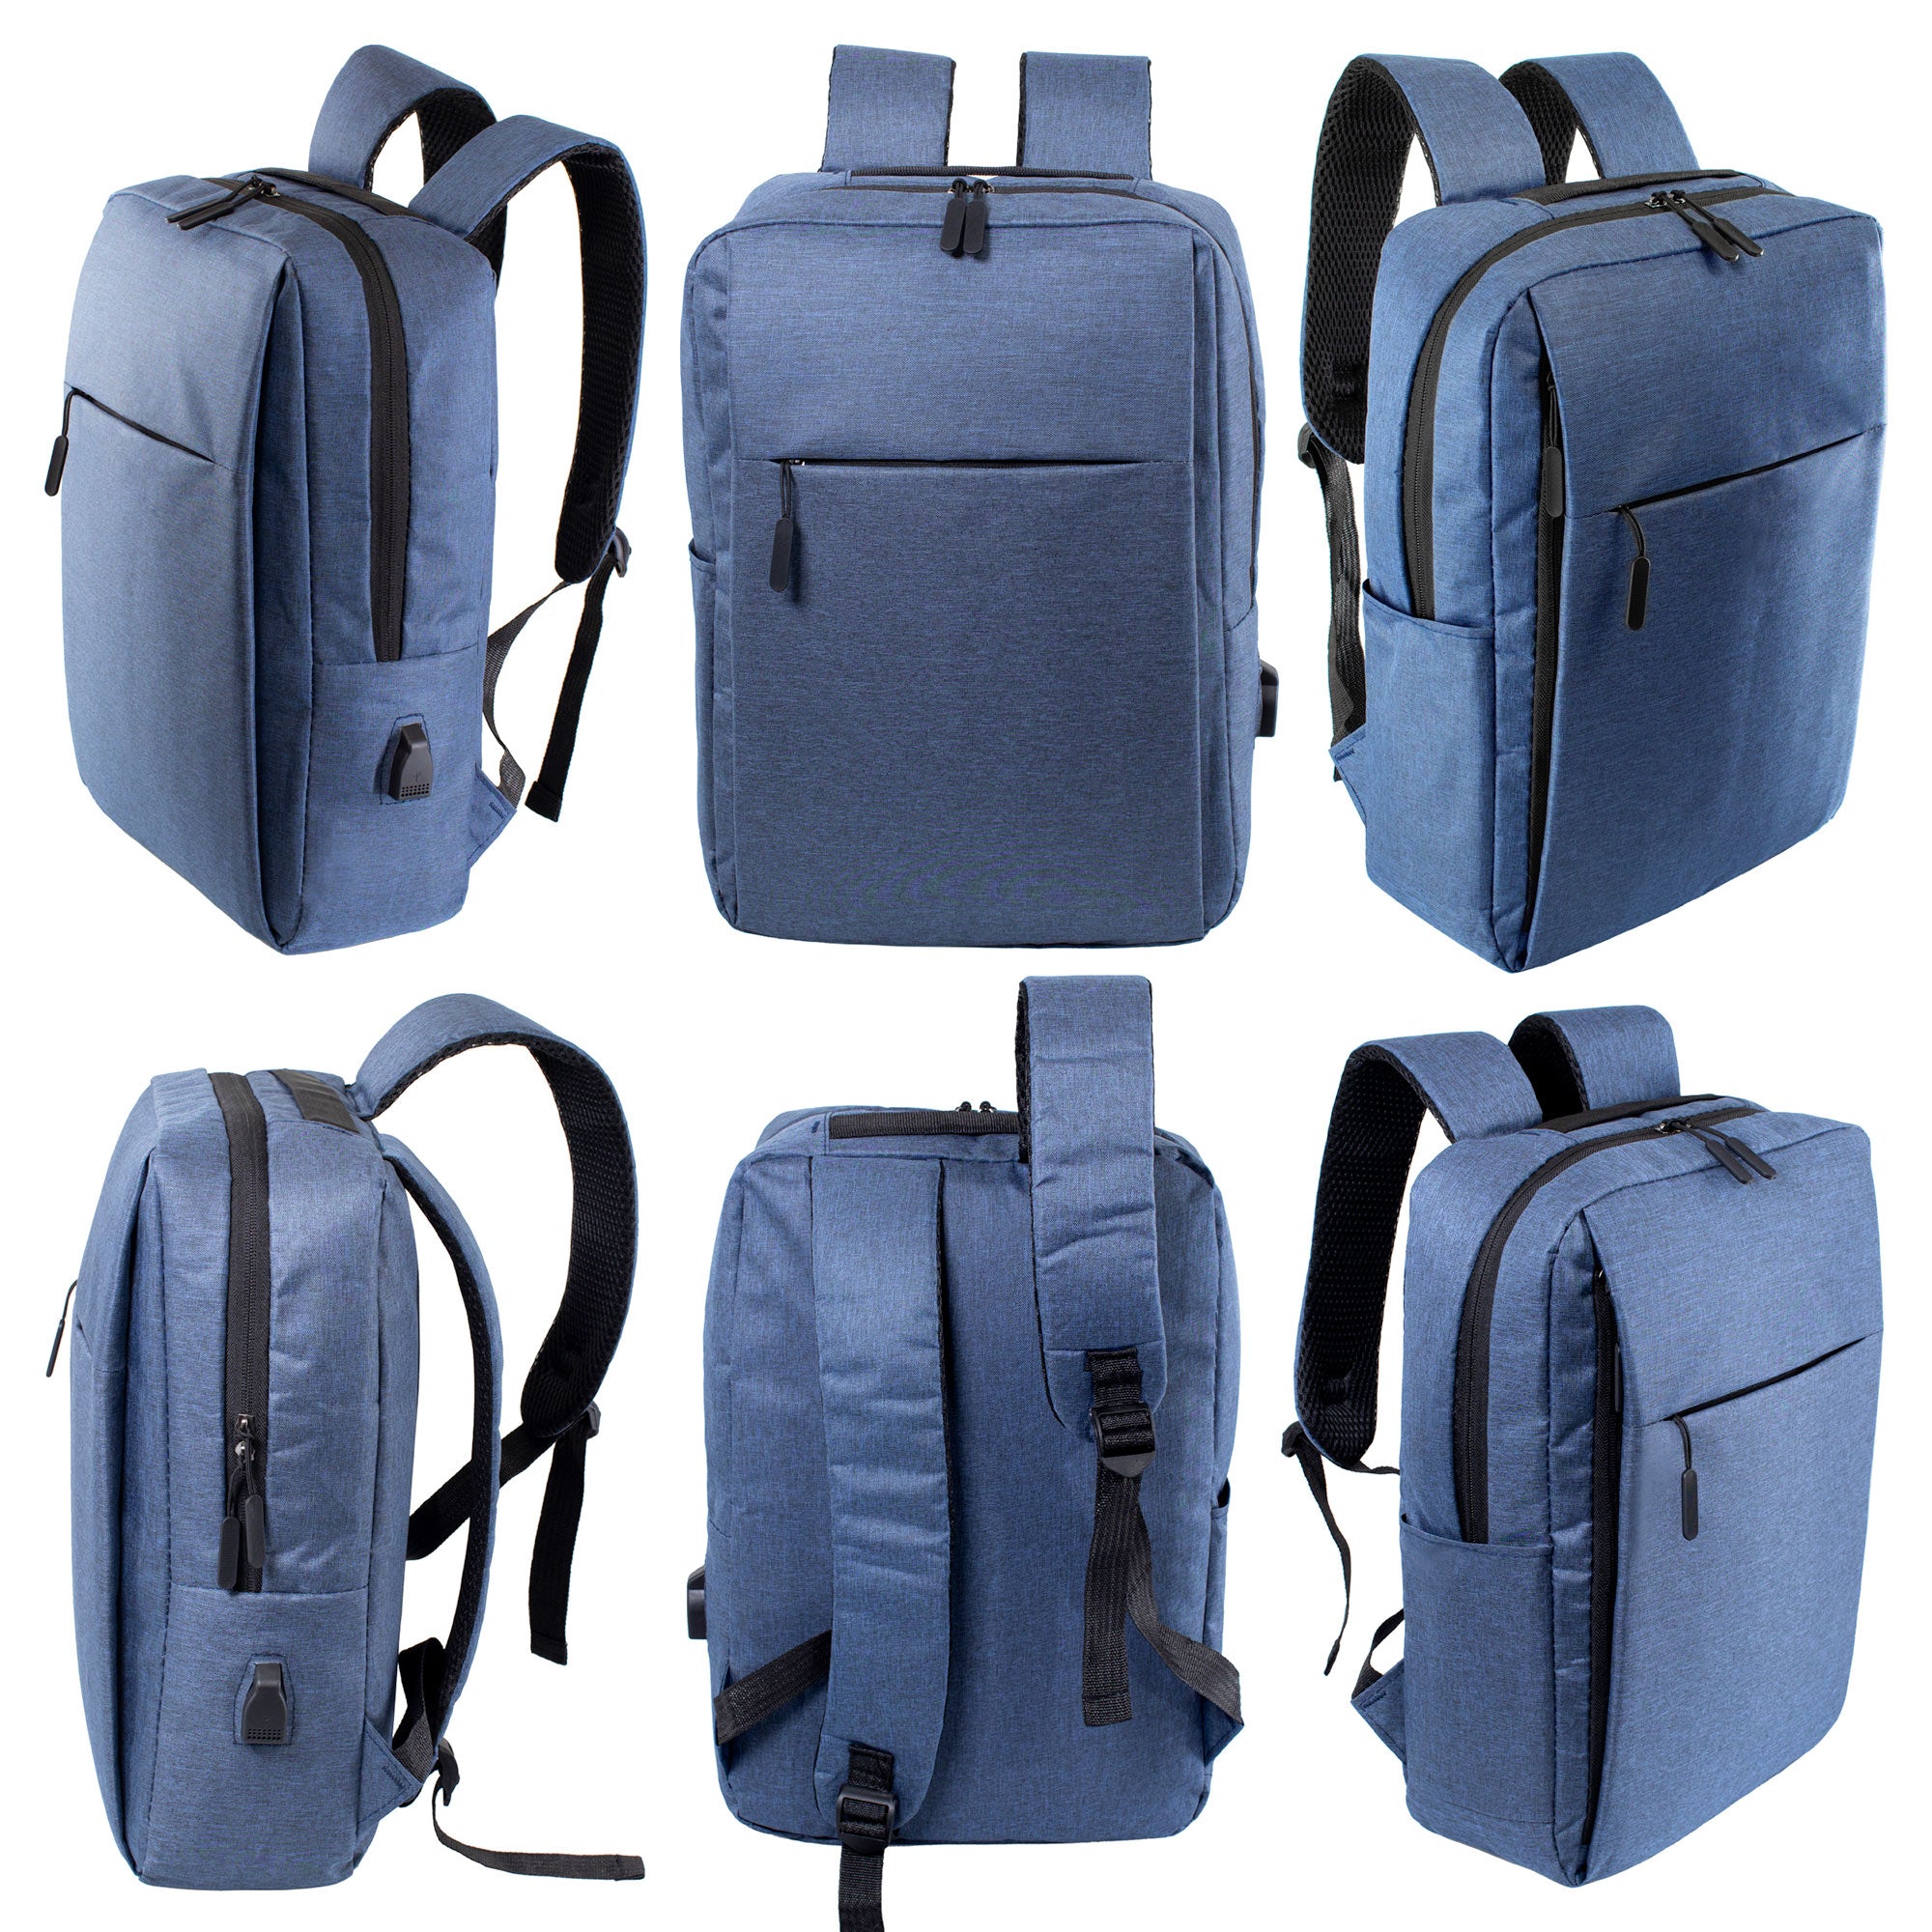 17" Wholesale Premium Laptop Backpacks in 3 Assorted Colors - Wholesale Bookbags Case of 24